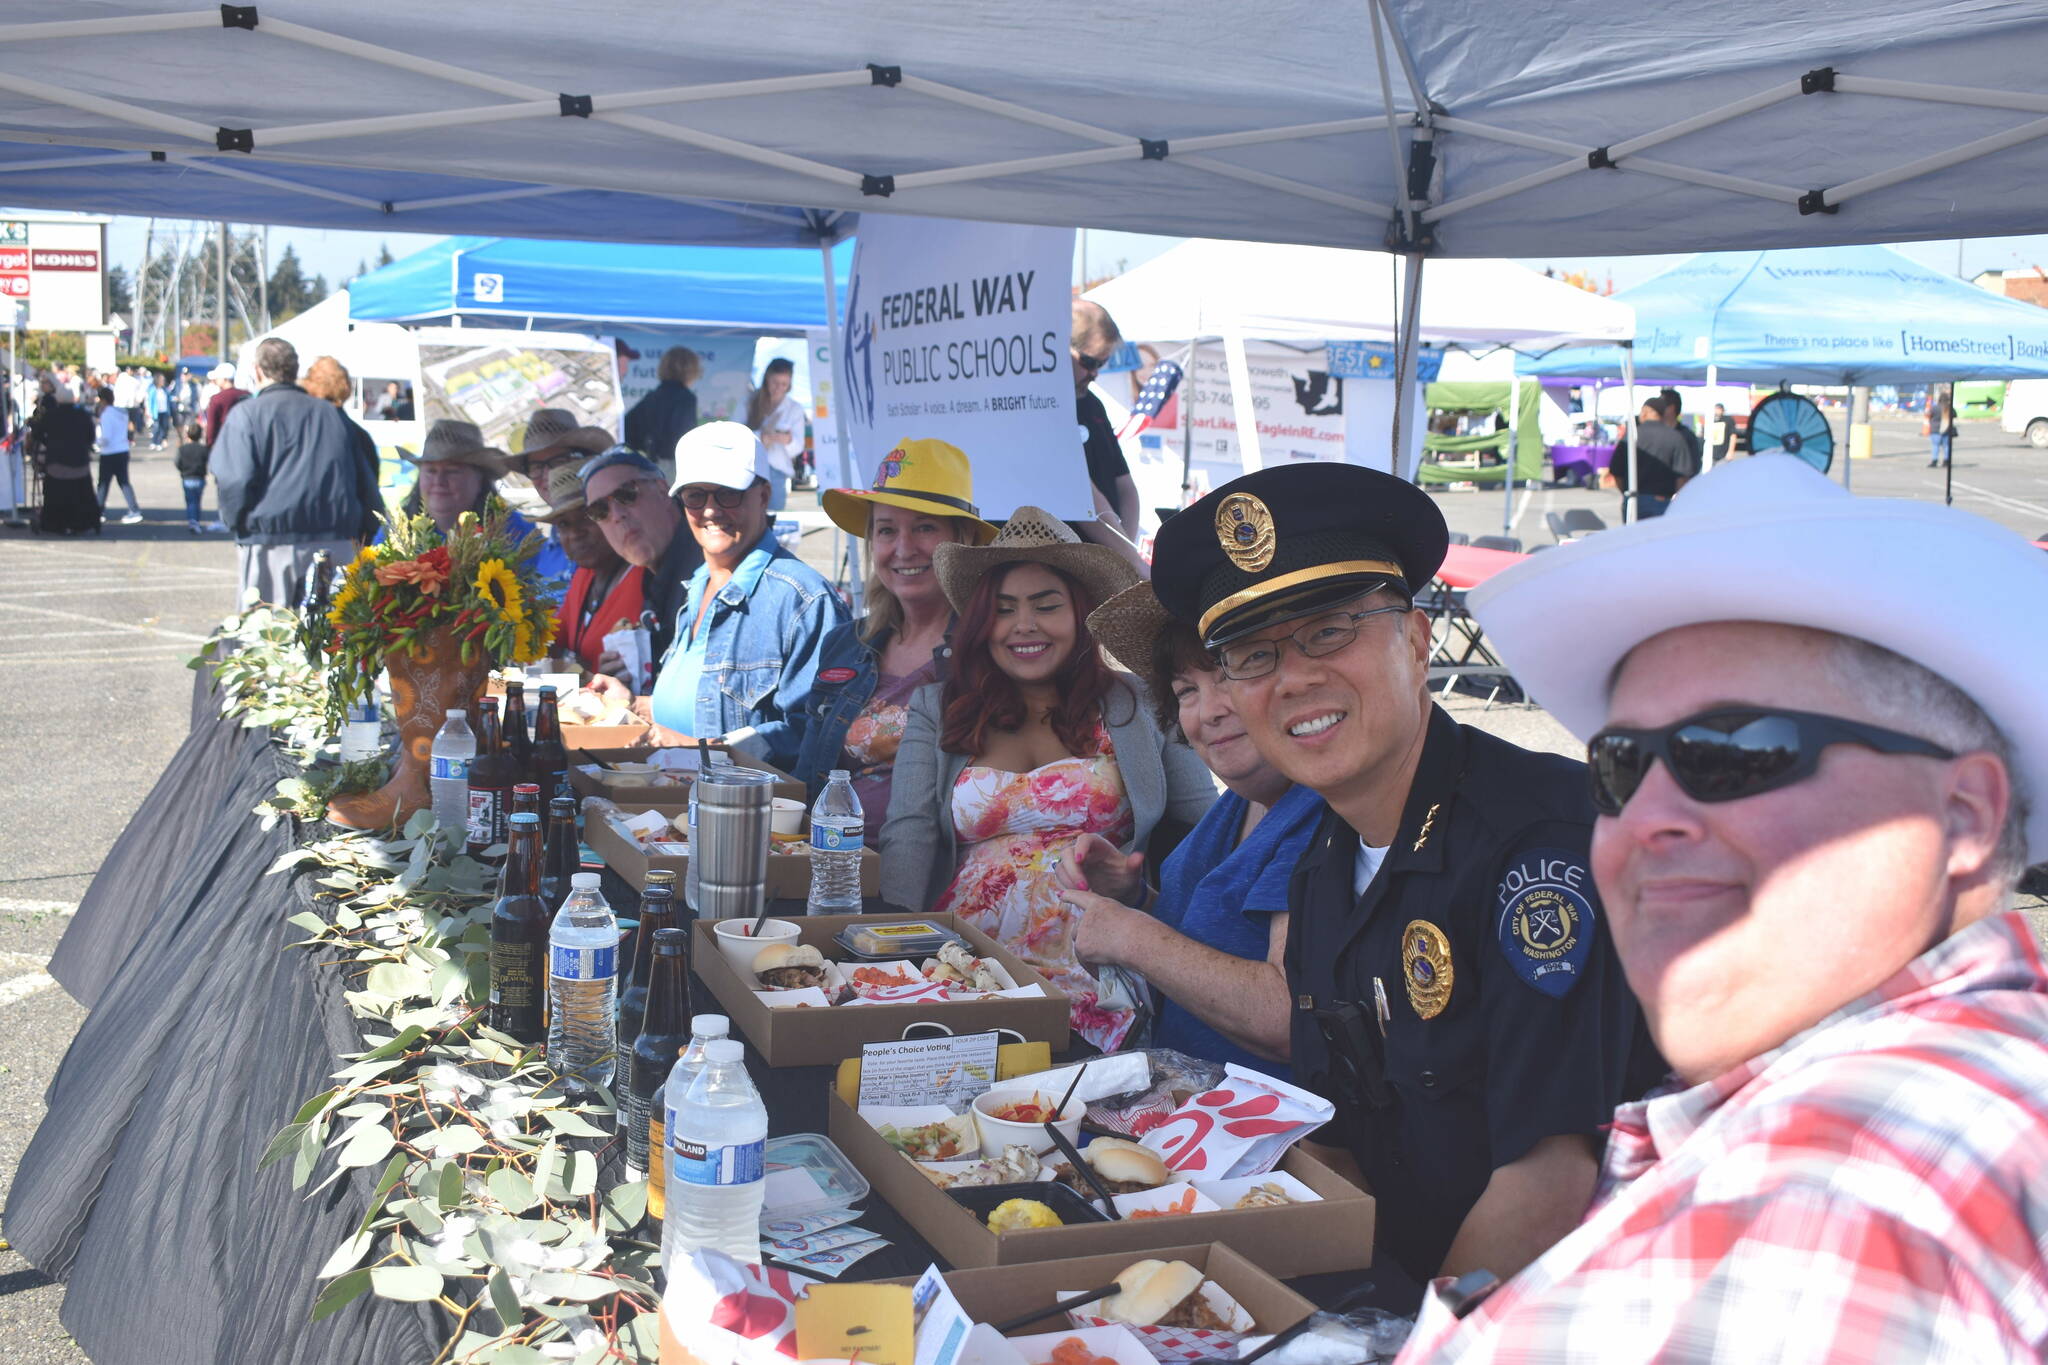 The judges table at the Taste of Federal Way smiles for a picture. The judges, not in order, were: King County Councilmember Pete von Reichbauer, Federal Way Police Chief Andy Hwang, South King Fire Rescue Assistant Fire Chief Kevin Crossen, Sound Transit Community Outreach Specialist Alonzo Buckner, Federal Way Public Schools Superintendent Dr. Dani Pfeiffer, Mary Ann Sharp from Heritage Bank, Federal Way Licensing Services owner Jan Novak, Keller Williams Agent Vickie Chynoweth, and Home Street Bank Branch Manager Arvin Kumar.